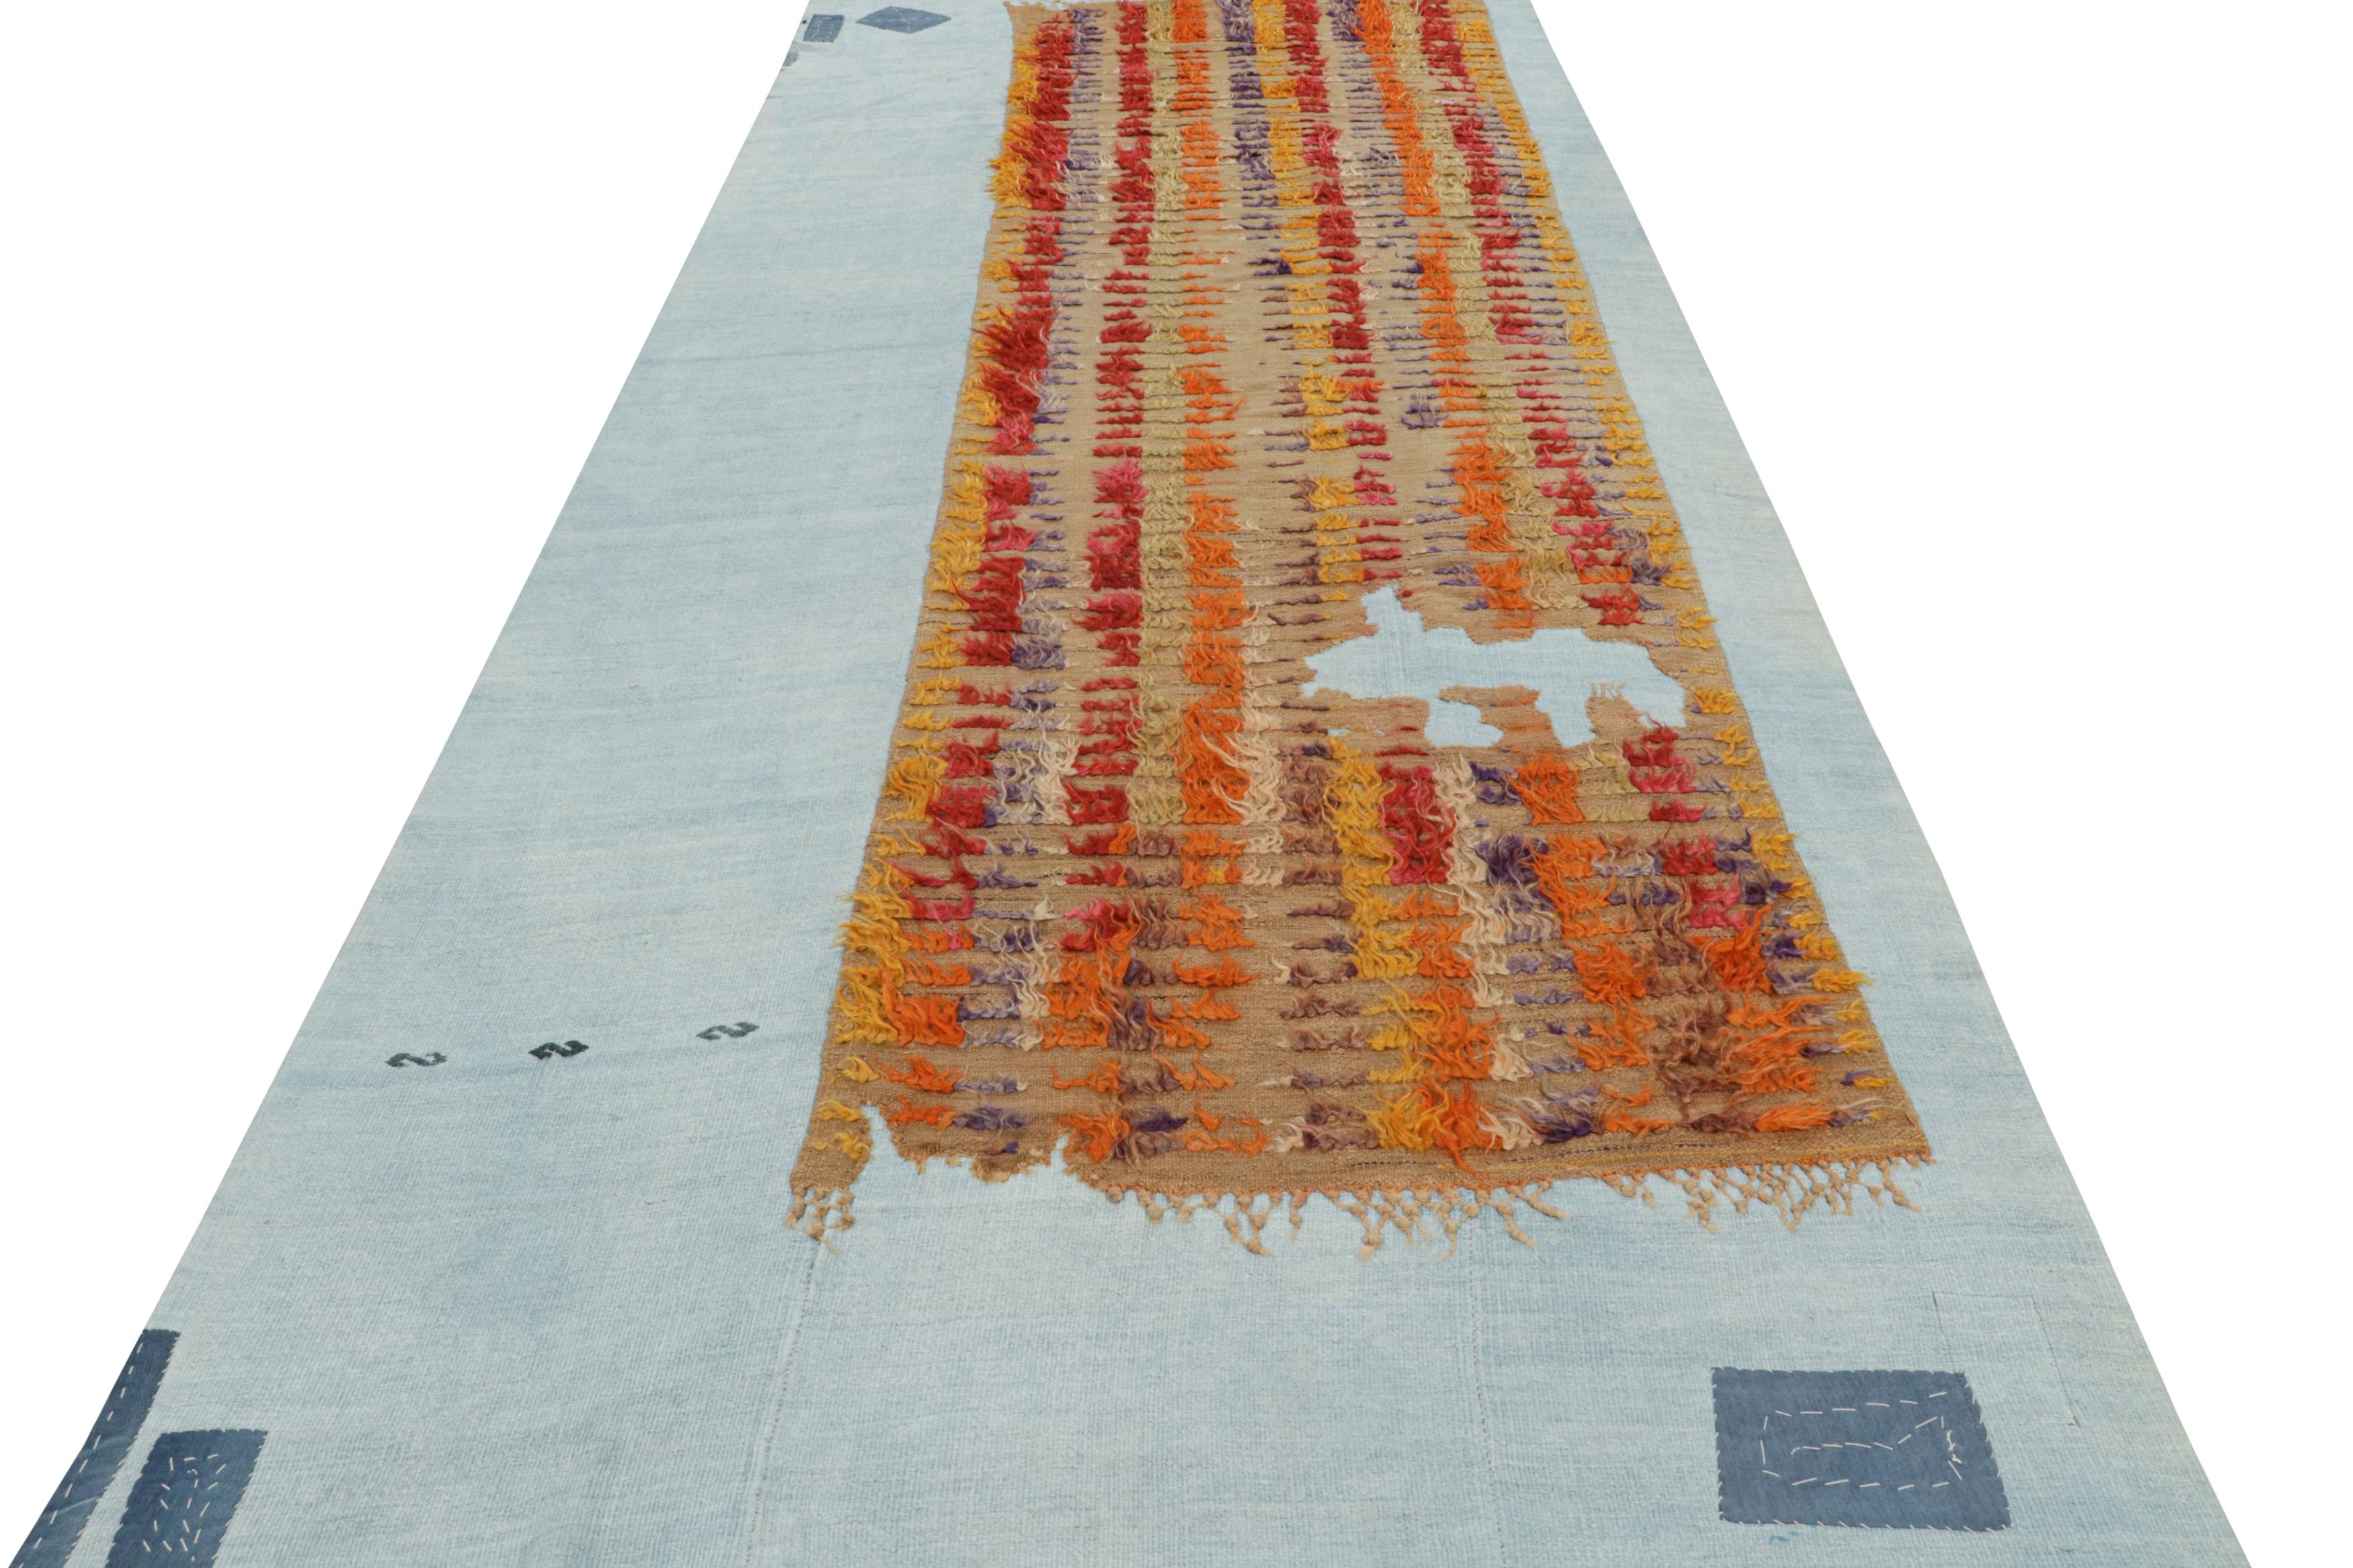 Hand-Woven Vintage Striped Solid Red Orange and Blue Layered Wool Flat-Weave by Rug & Kilim For Sale